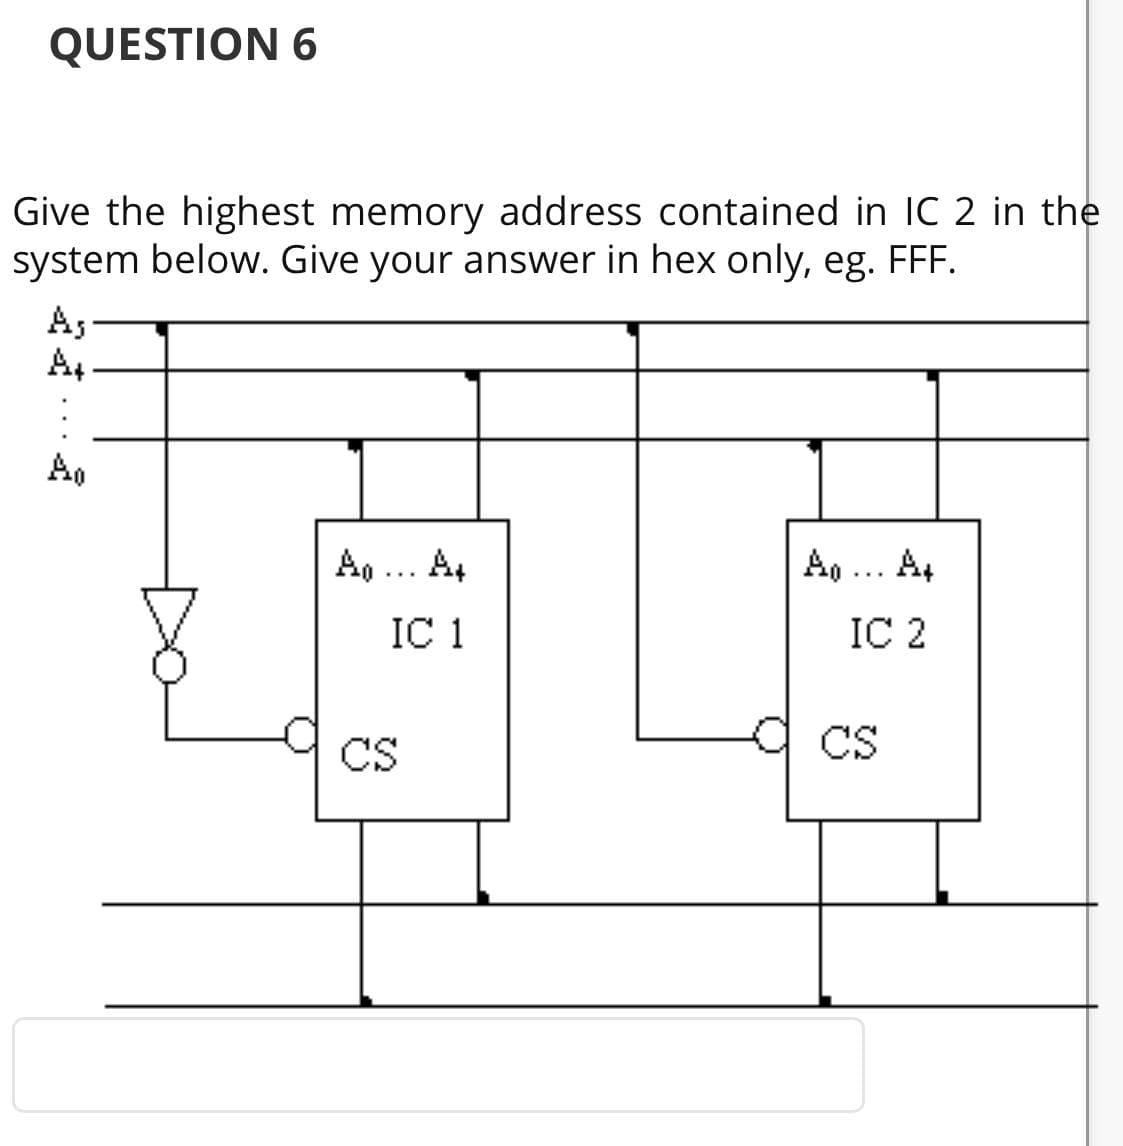 QUESTION 6
Give the highest memory address contained in IC 2 in the
system below. Give your answer in hex only, eg. FFF.
As
A,
Ao
A, ... A,
A,
IC 1
IC 2
CS
CS
